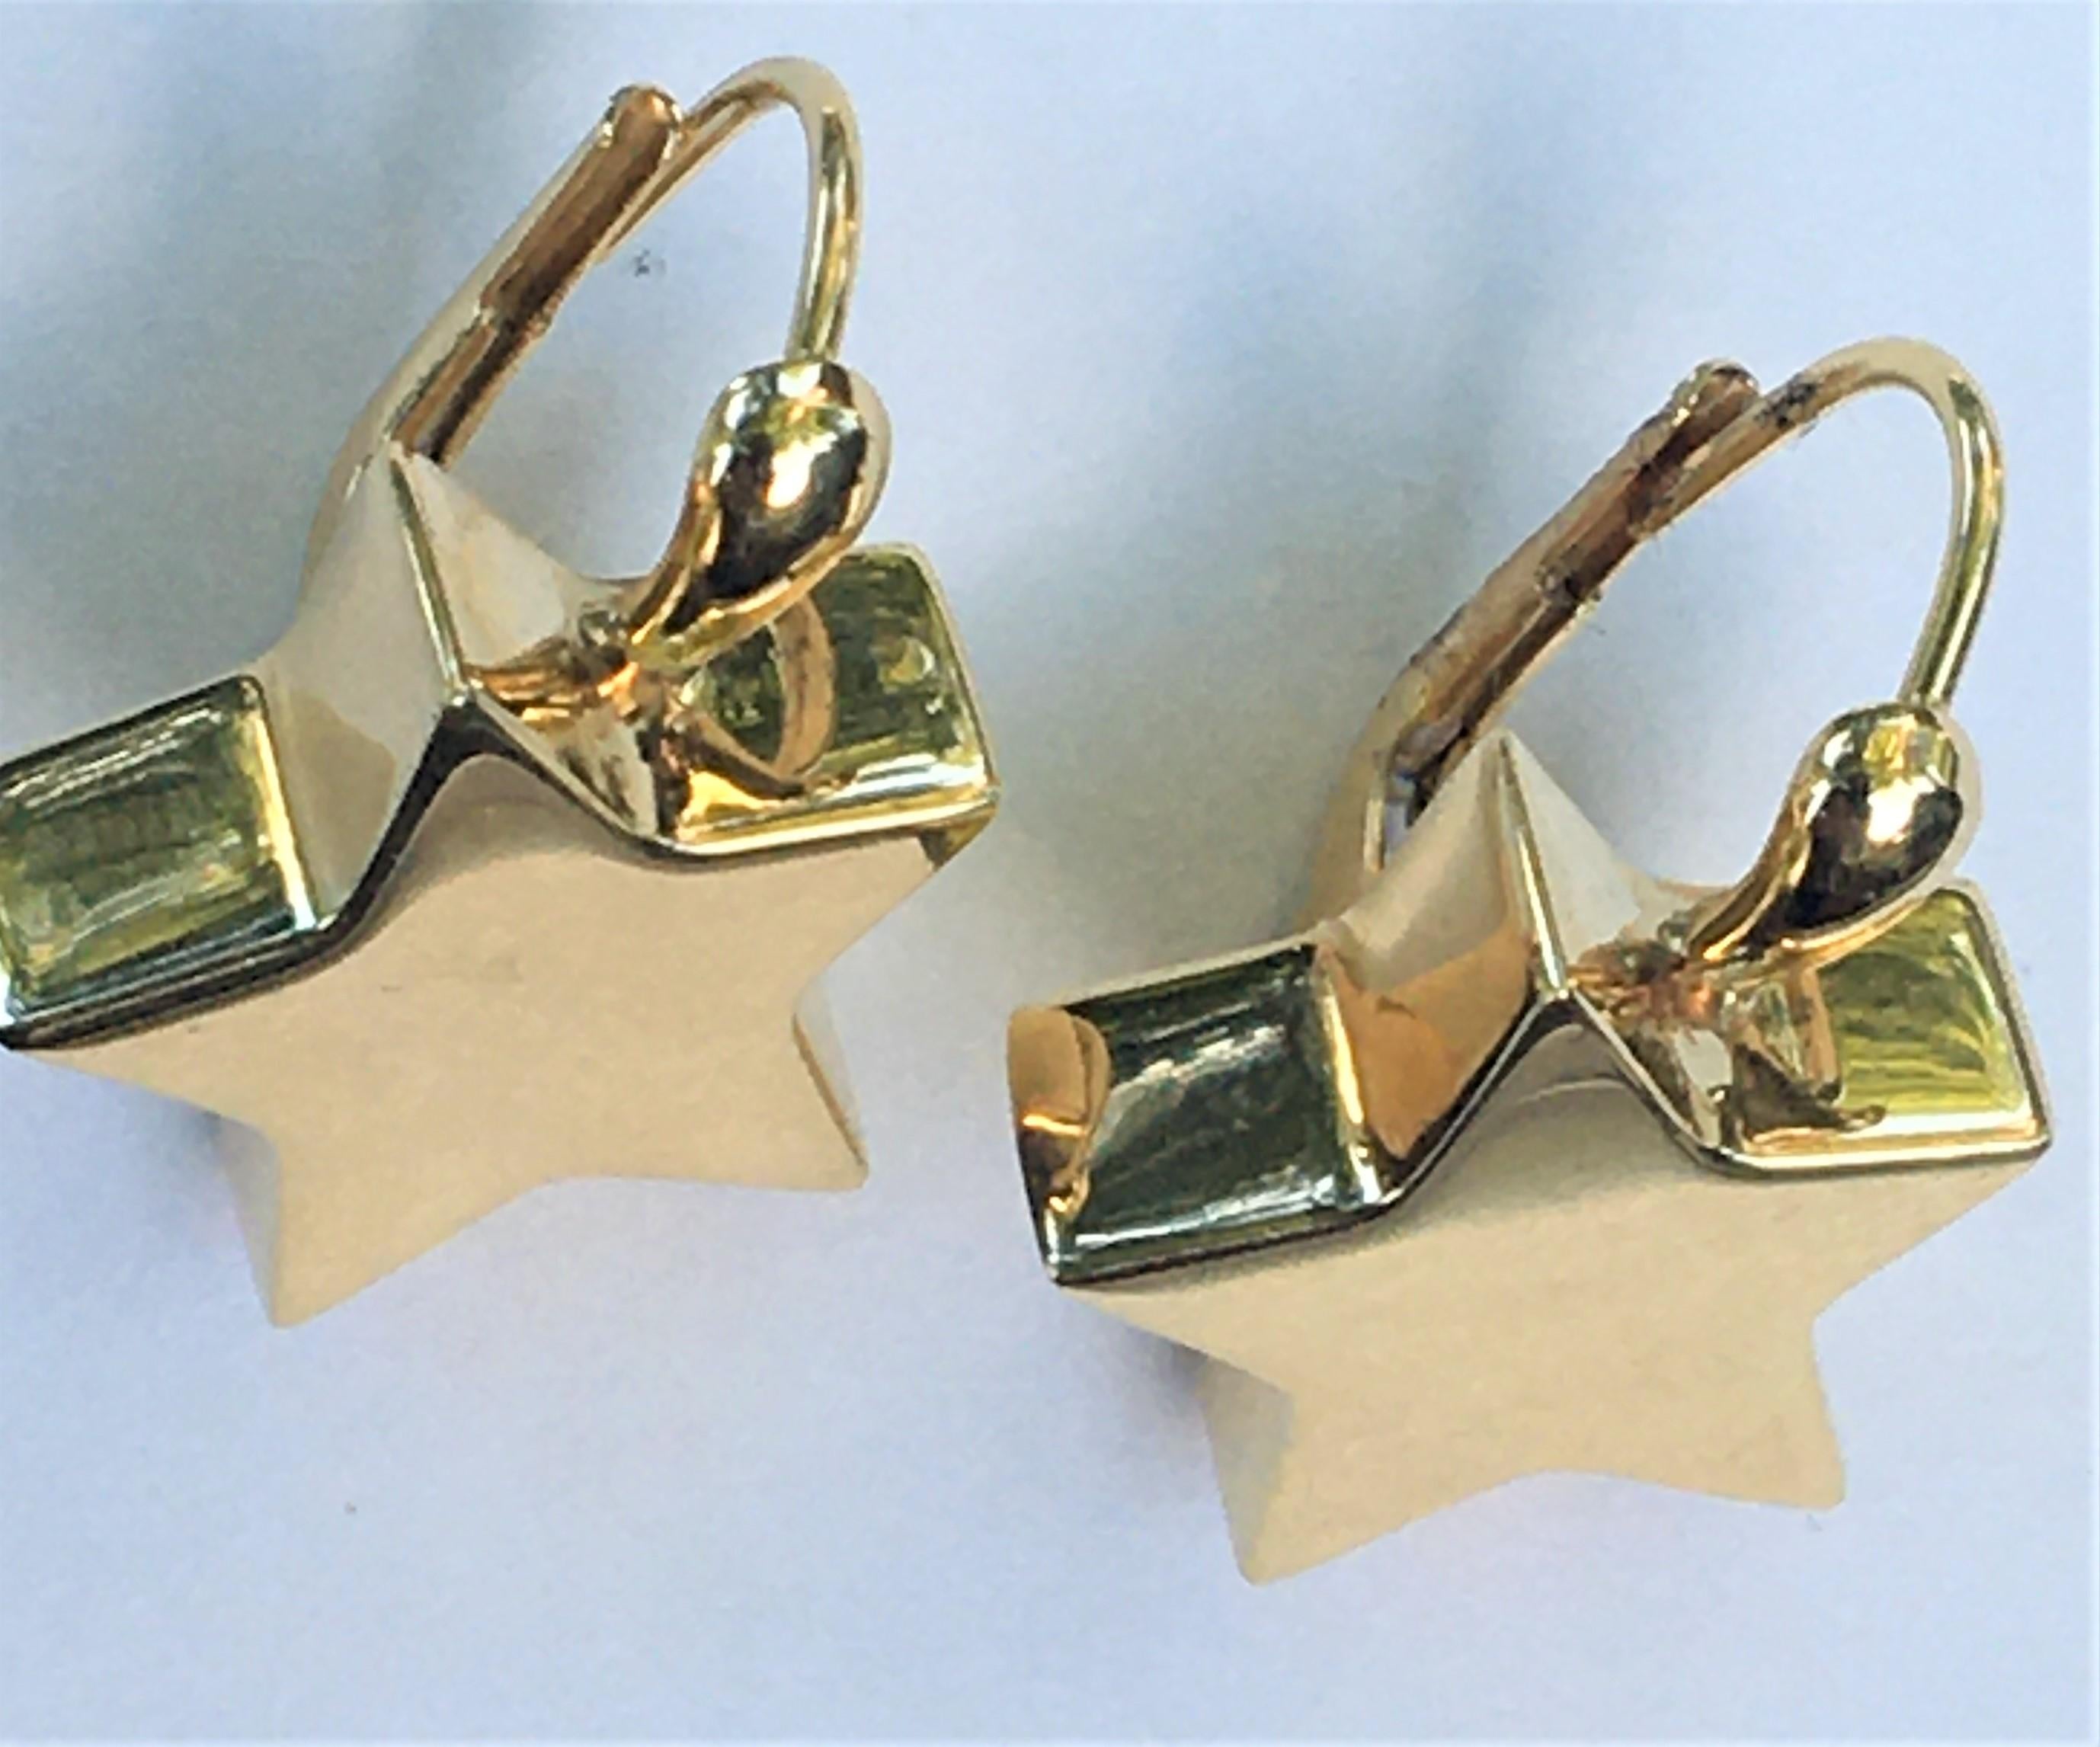 These beautiful earrings can be worn everyday!!
By designer Simon Sobie & Co.
18 karat yellow gold star and lever backs
Star is approximately 16mm in diameter
Entire length is approximately 22mm
Stamped 